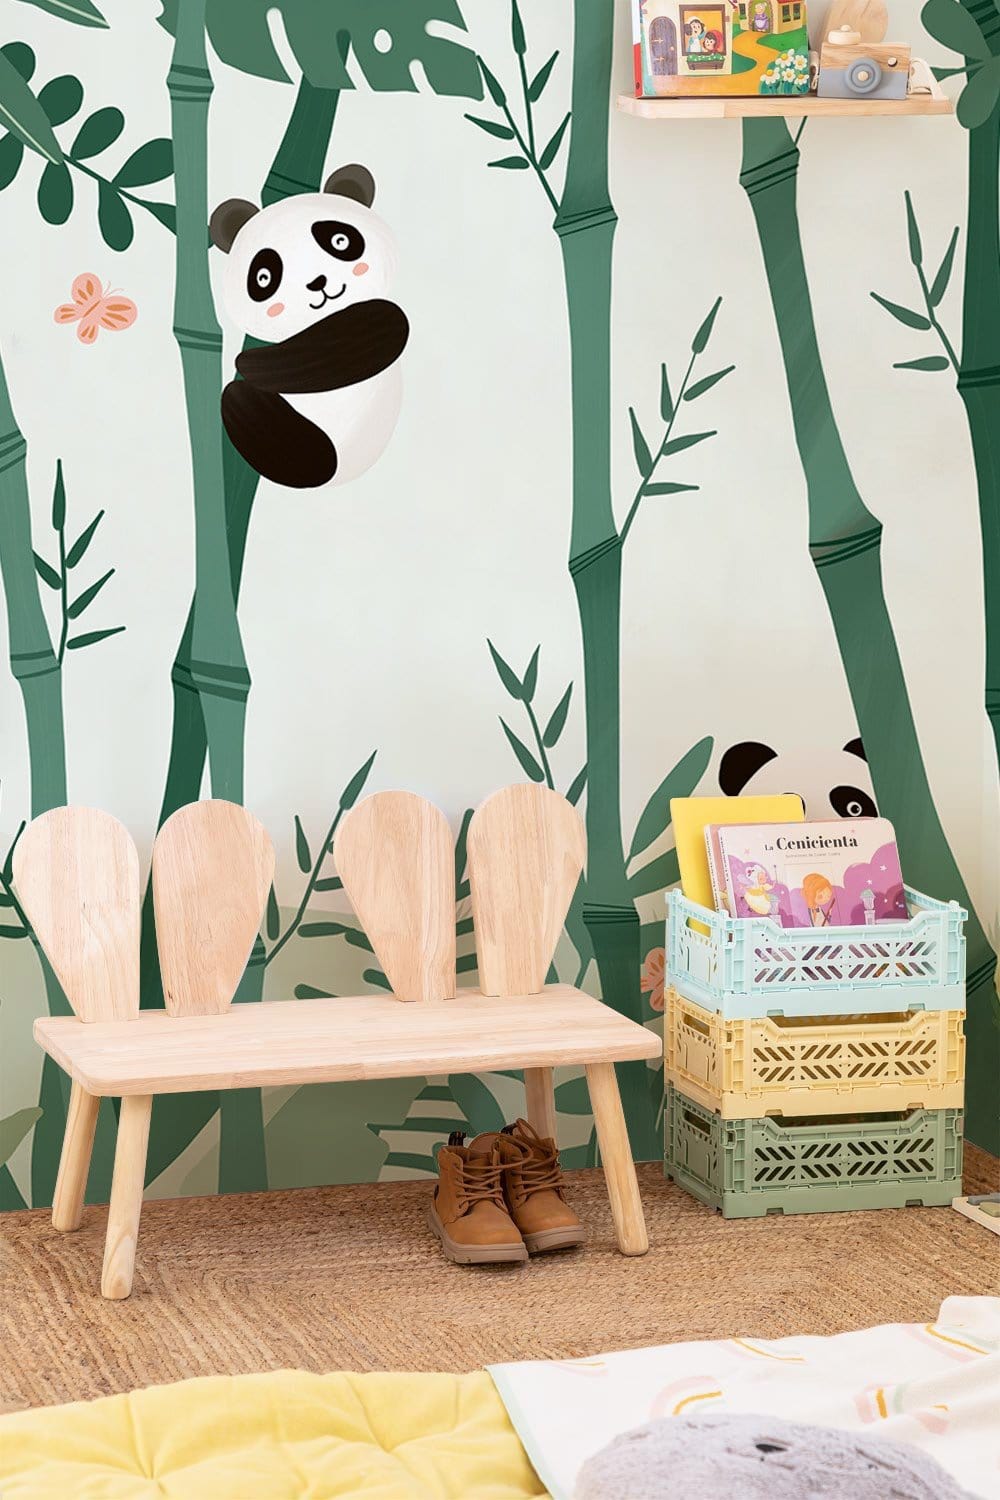 Wallpaper of a Panda with a Bamboo Kids Room with a Mural